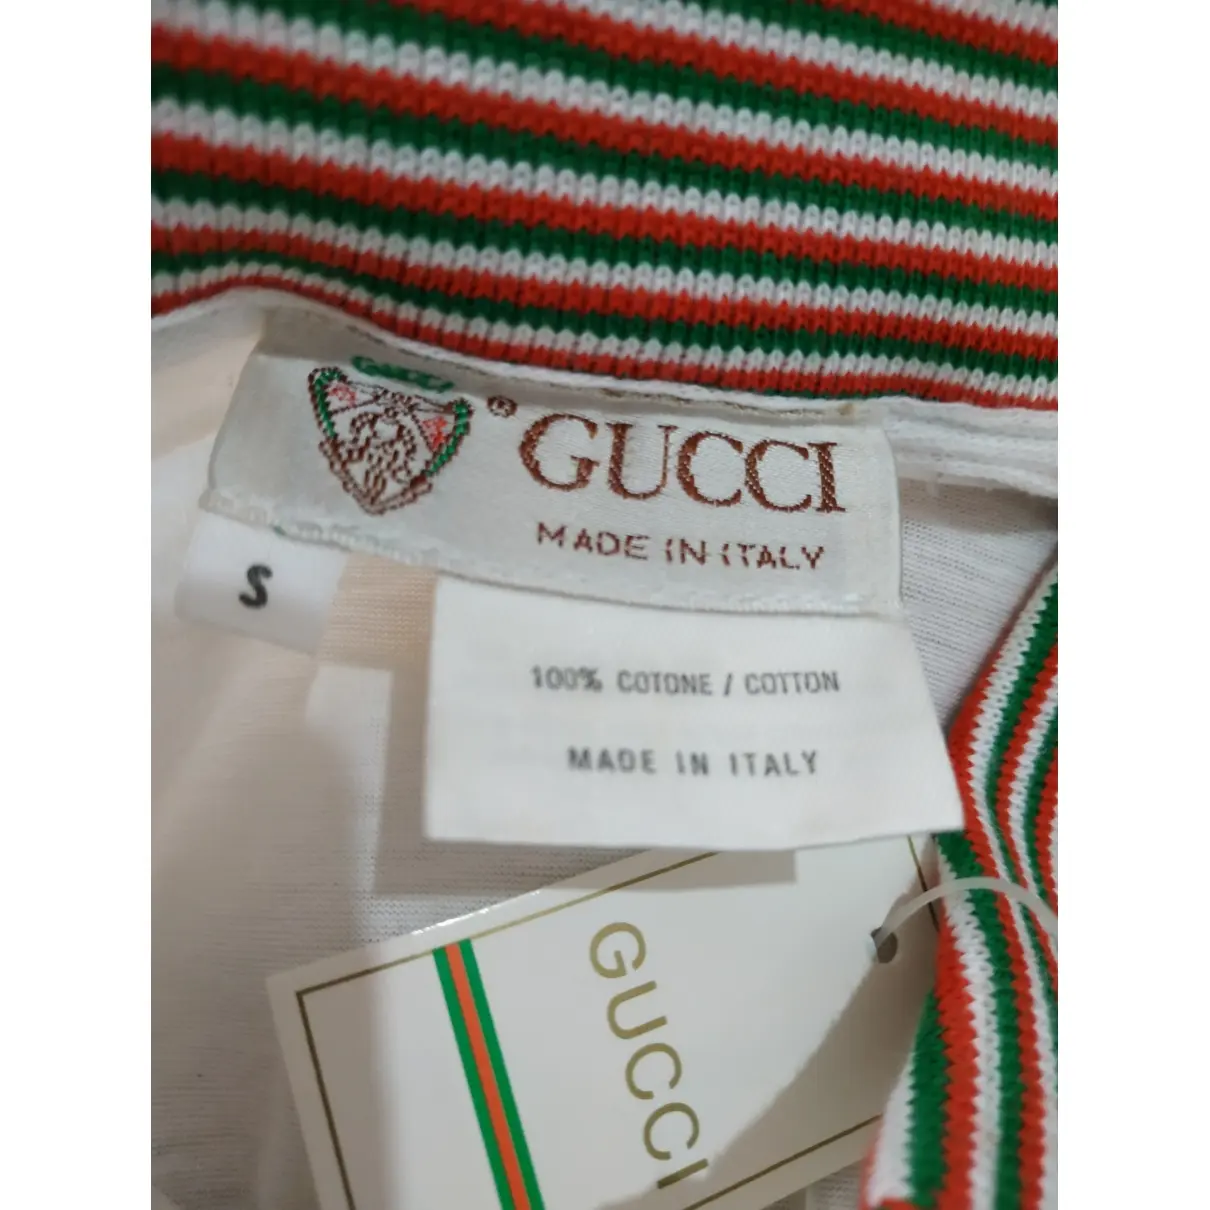 Buy Gucci Polo shirt online - Vintage